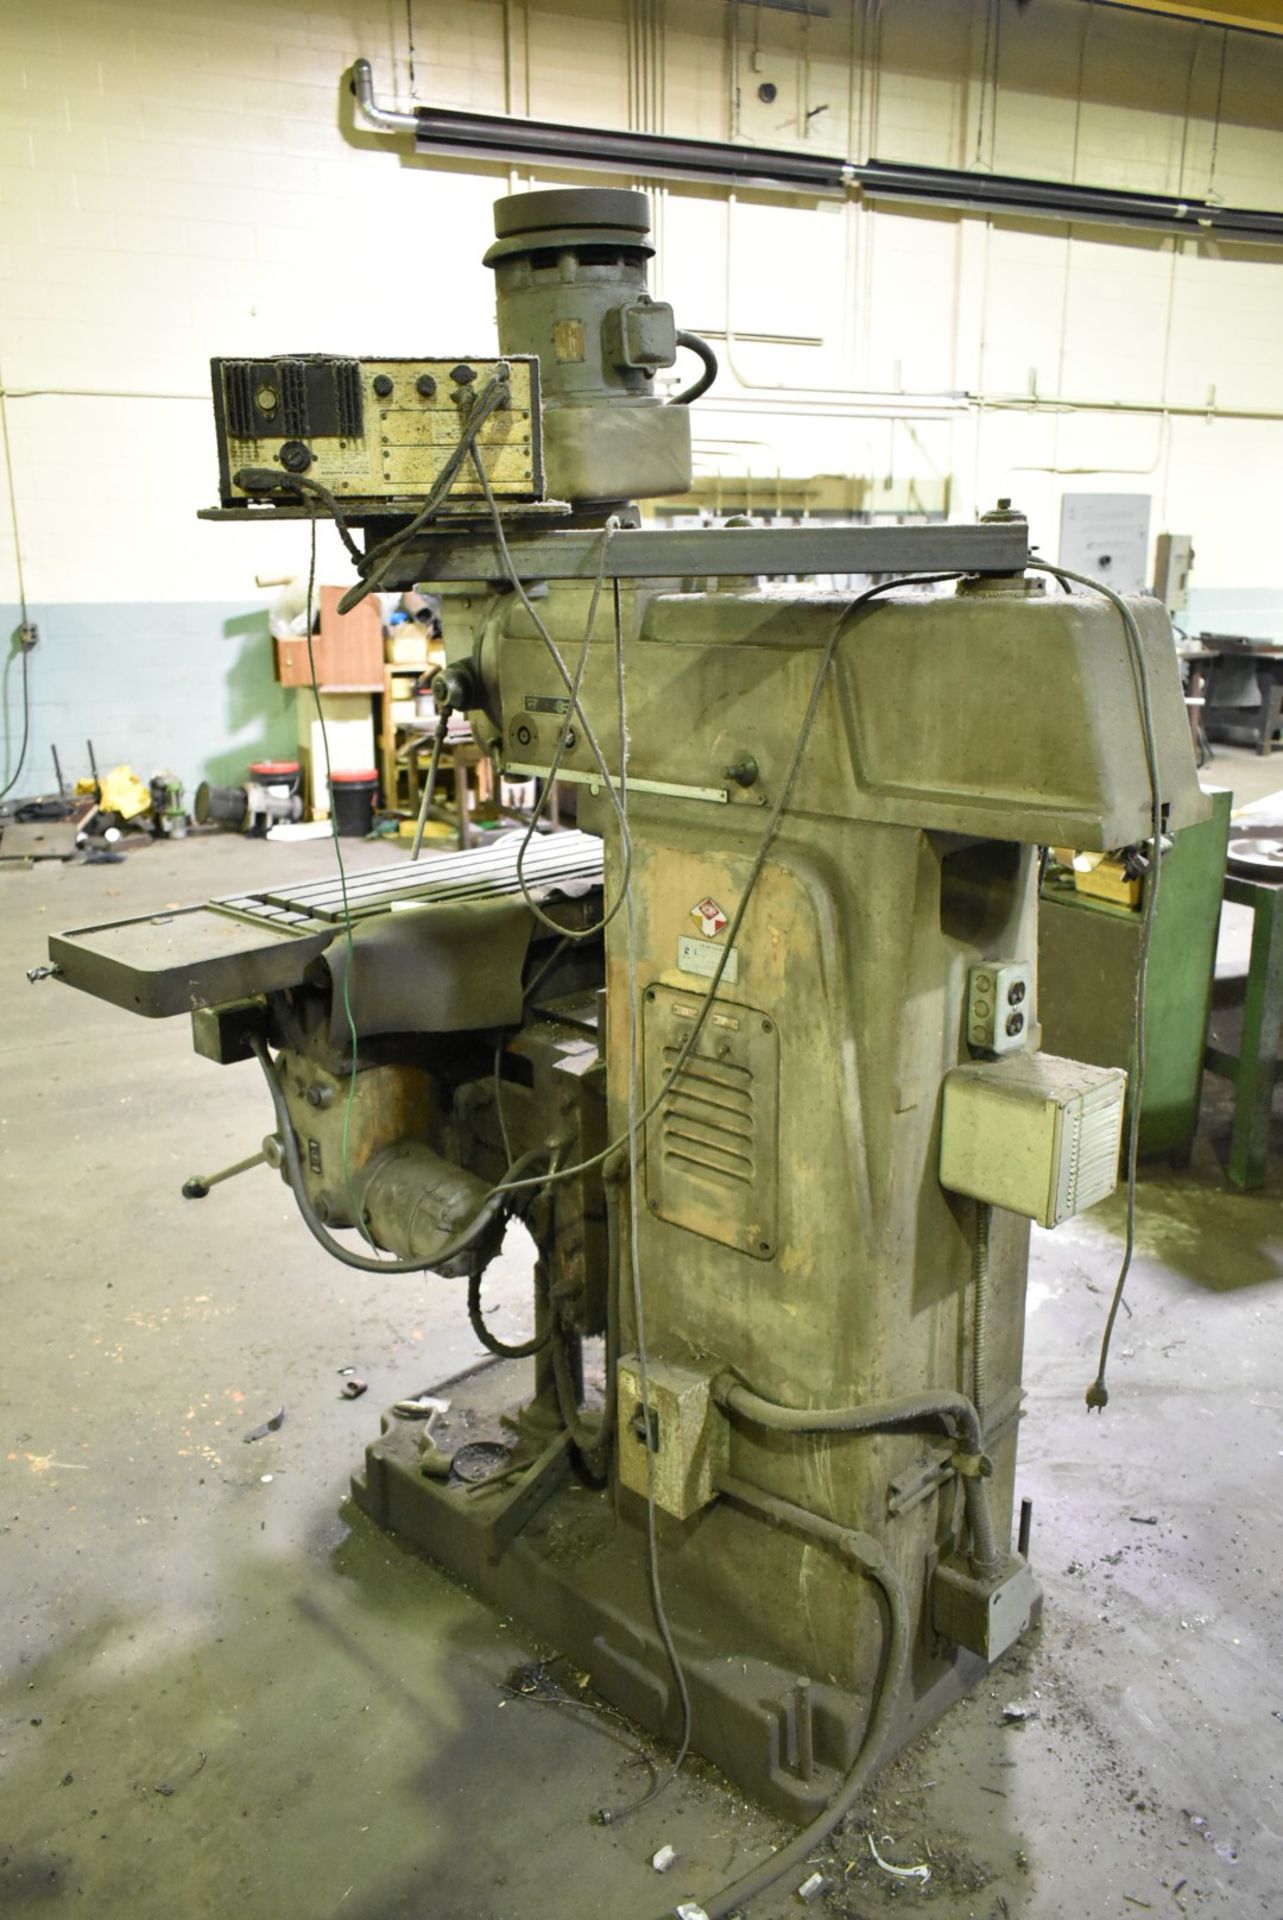 RAMBAUDI V2 VERTICAL MILLING MACHINE WITH 12"X42" TABLE, SPEEDS TO 5100 RPM, MITUTOYO 2-AXIS DRO, - Image 2 of 6